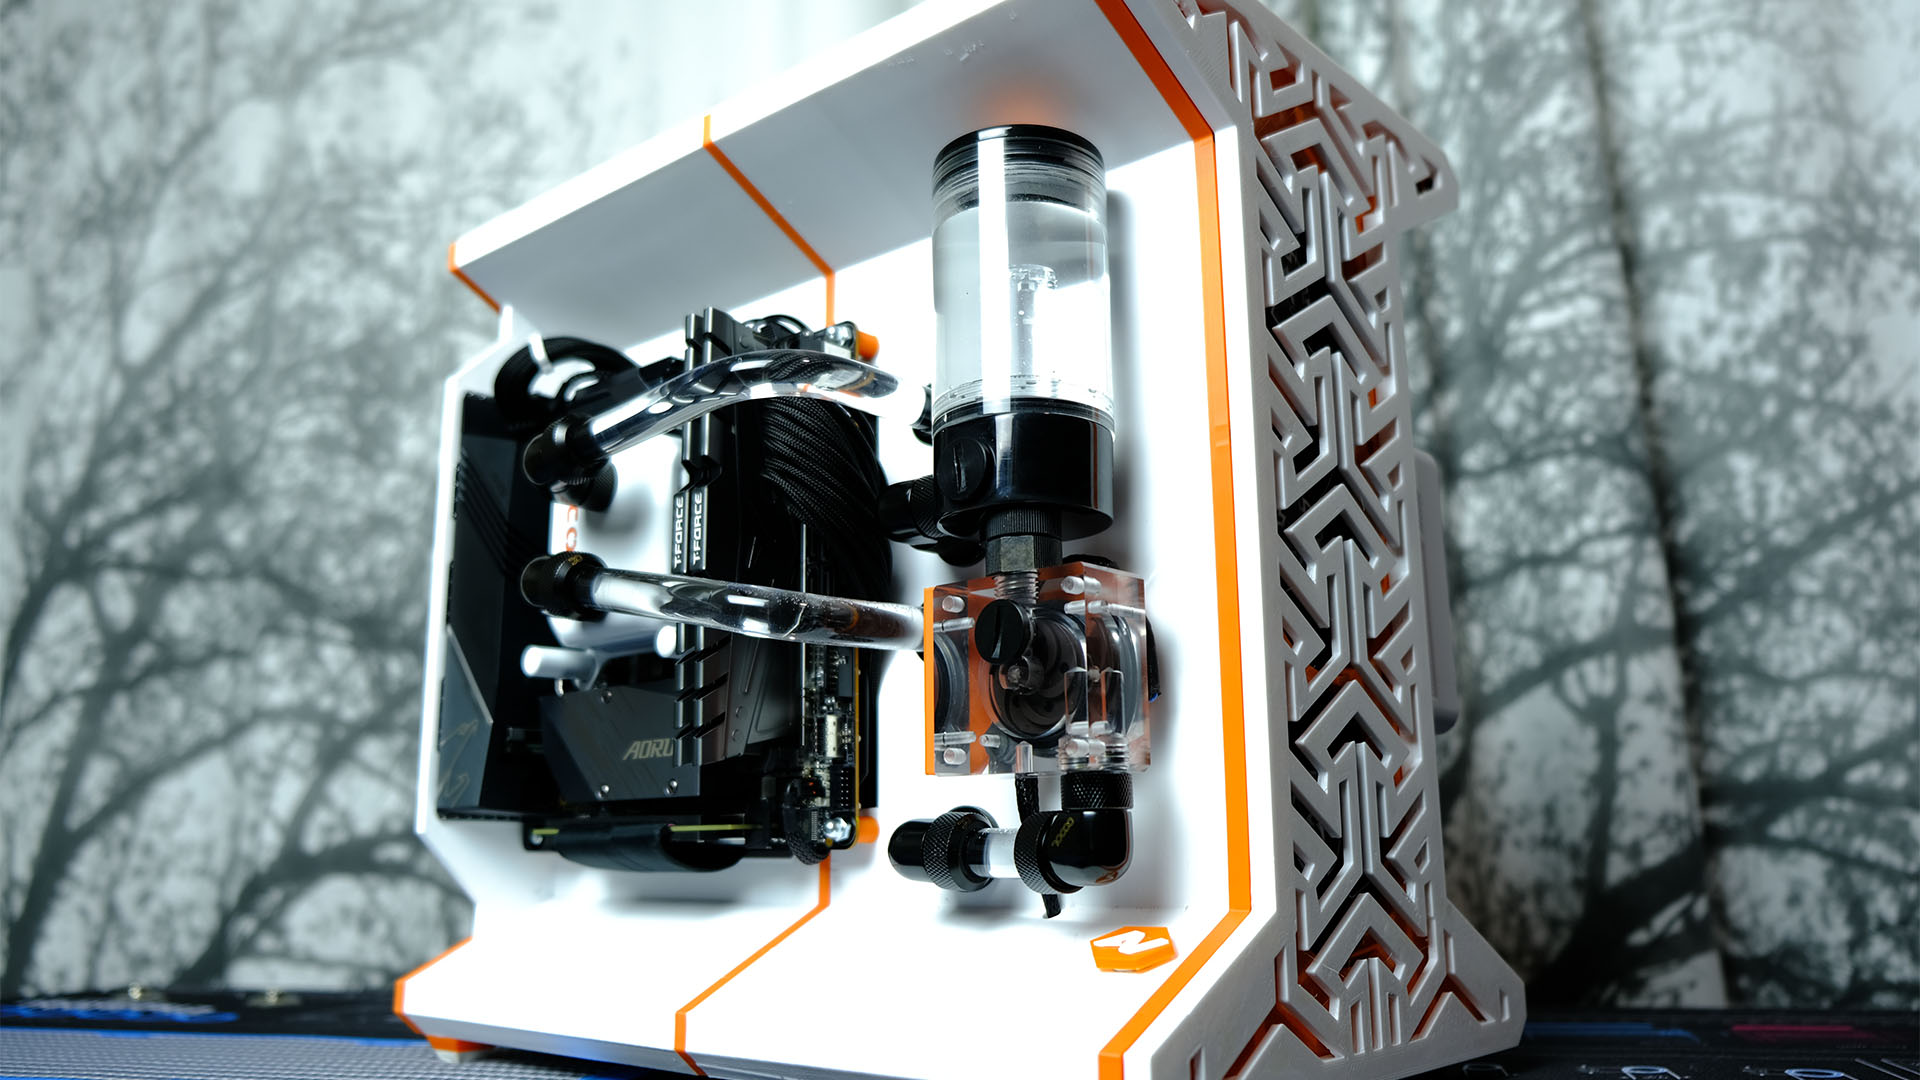 The water cooling system in the 3d printed white and orange PC case